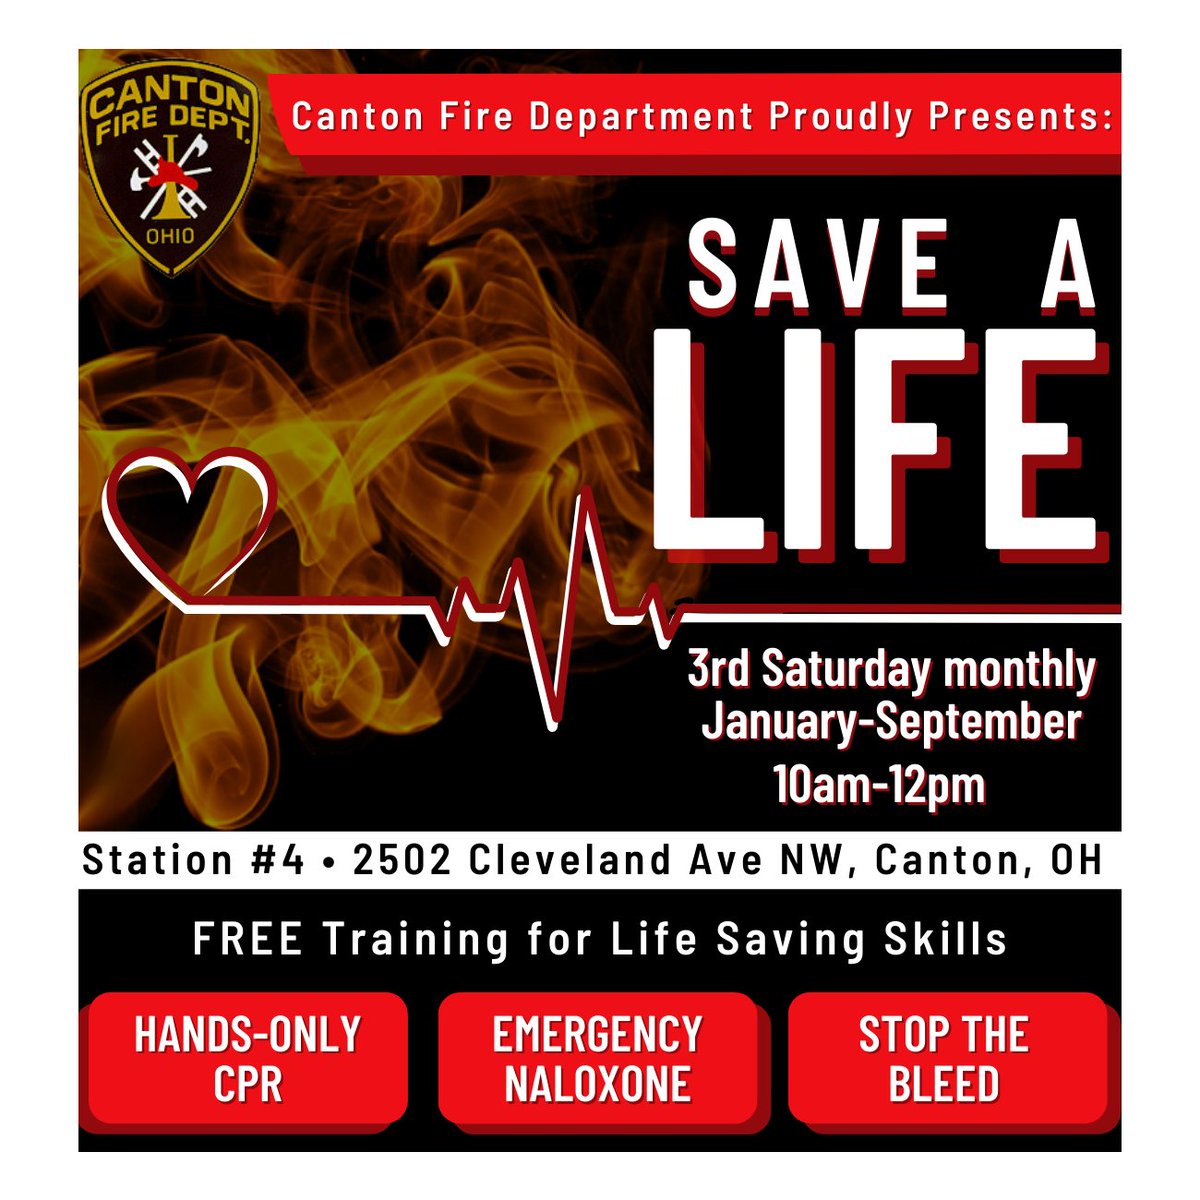 Effective trauma care starts the moment an injury or life-threatening event occurs, meaning it is often a bystander that helps to give our patients a second chance at life!  Join an upcoming ‘Save a Life’ event to learn life-saving skills. Register here: outlook.office365.com/owa/calendar/H….